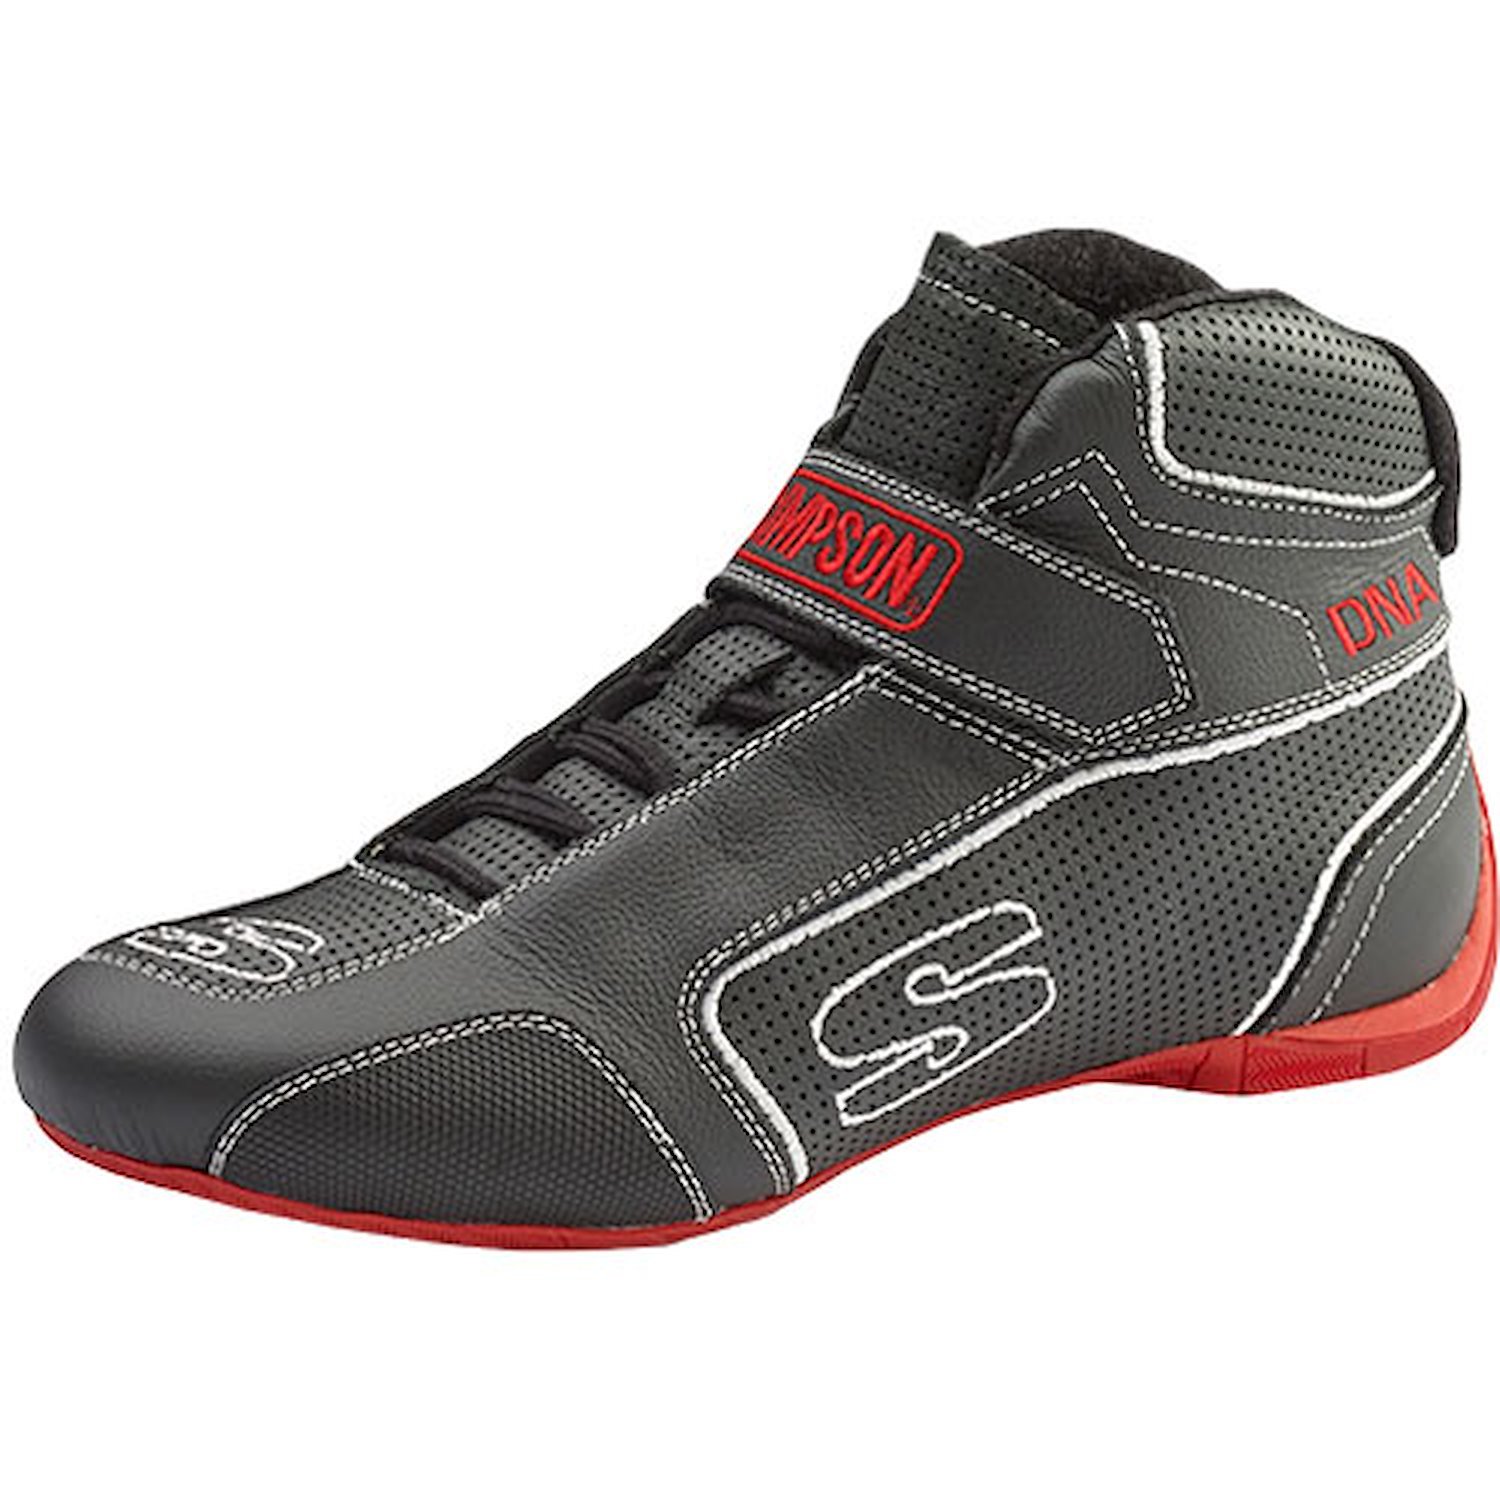 SFI 3.3/5 DNA Racing Shoes Size: 9